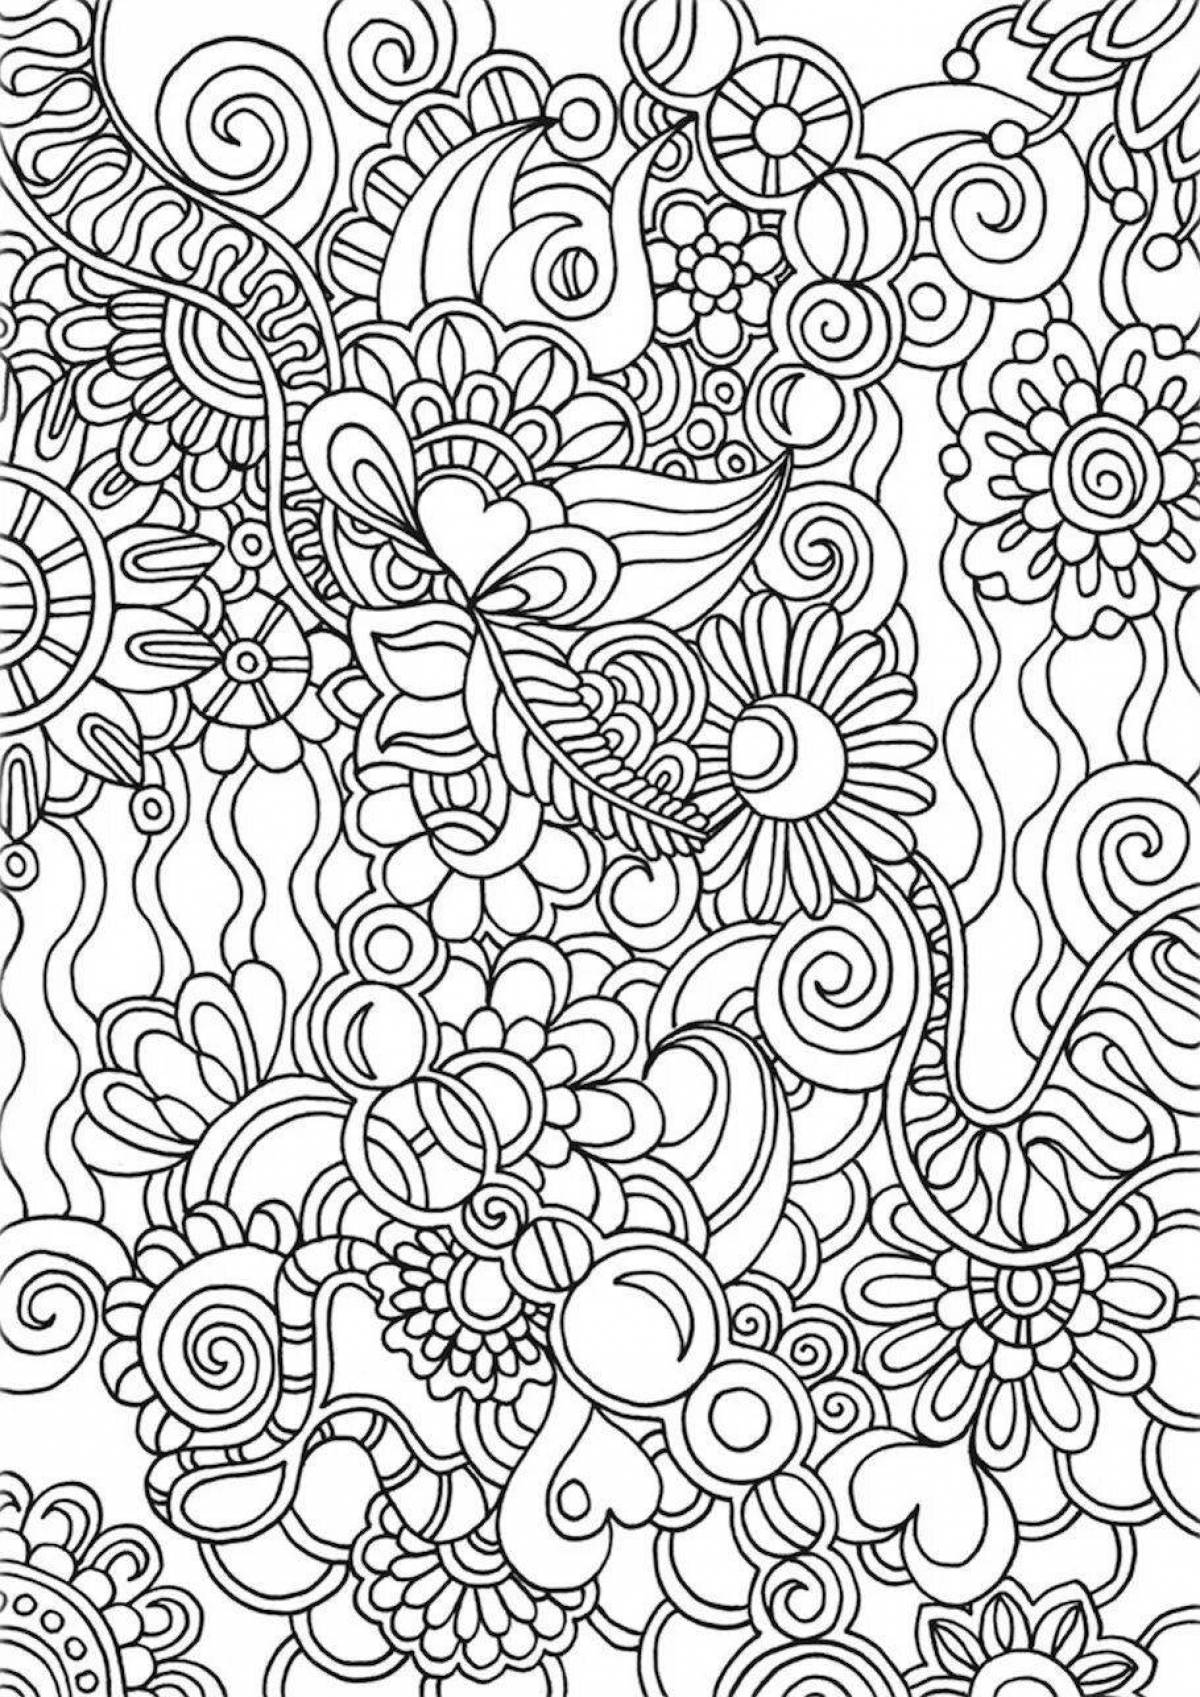 Exciting adult coloring book